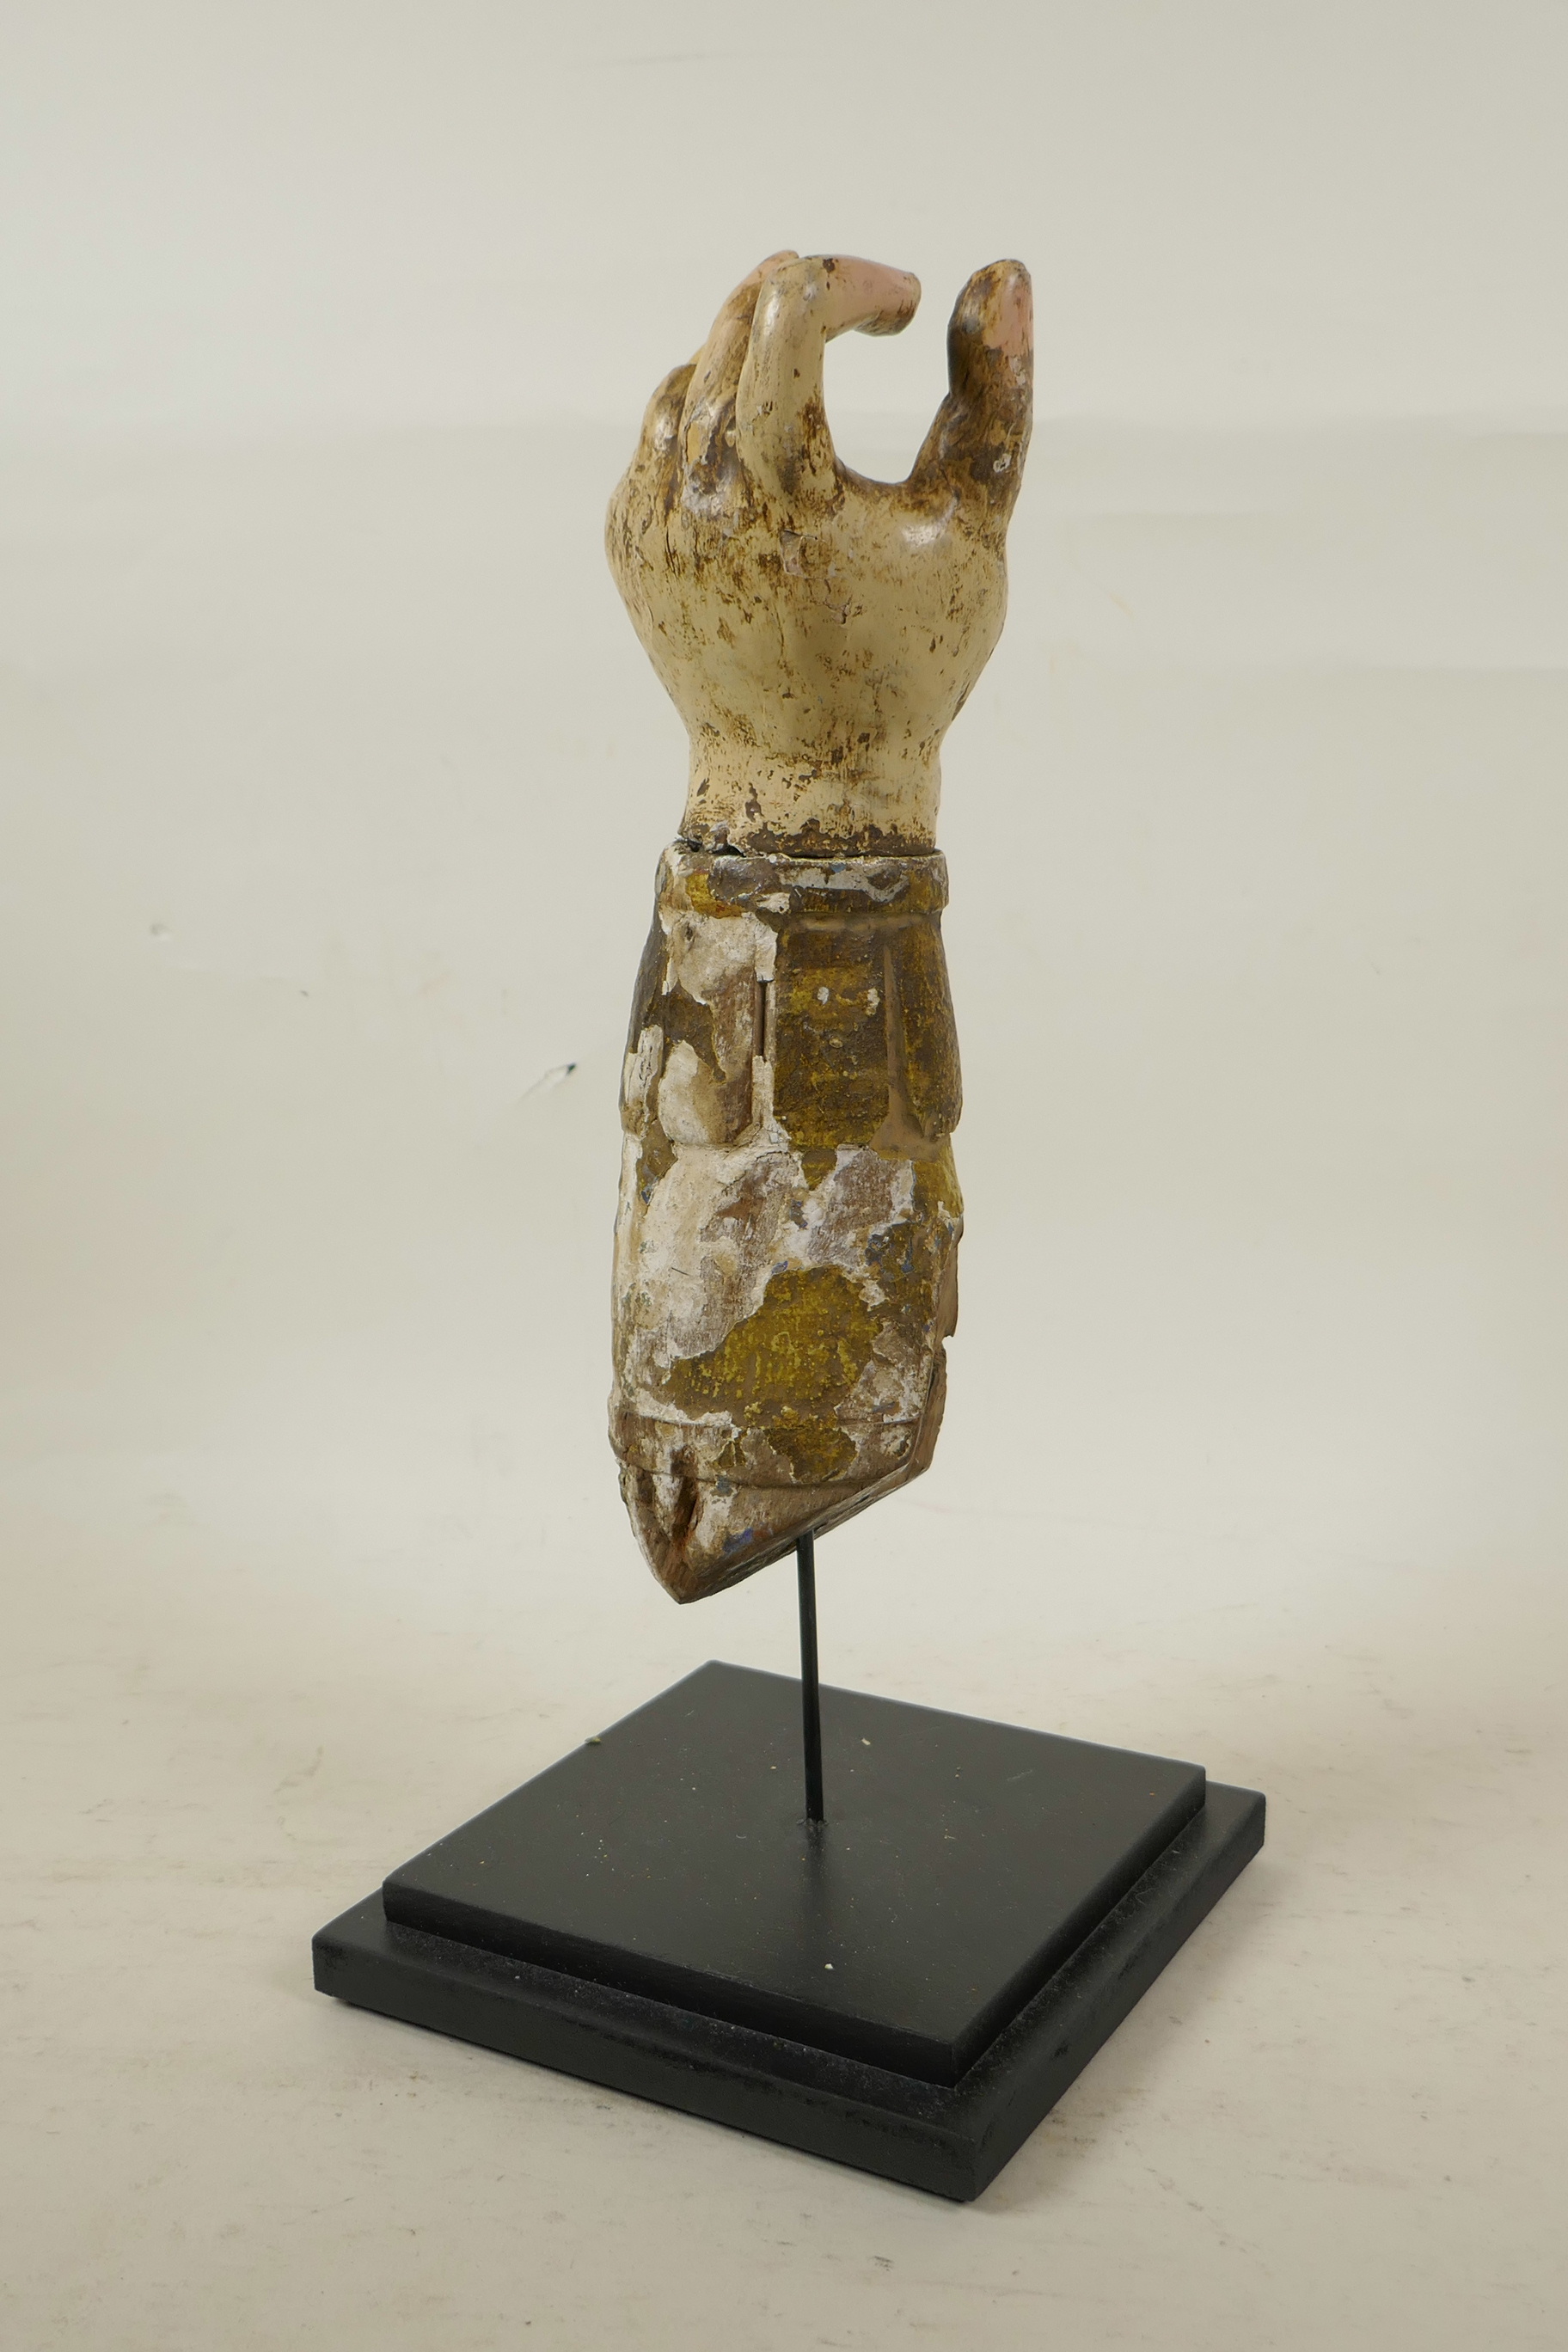 A C18th carved and parcel gilt wood hand, mounted, 12½" high, losses - Image 2 of 4